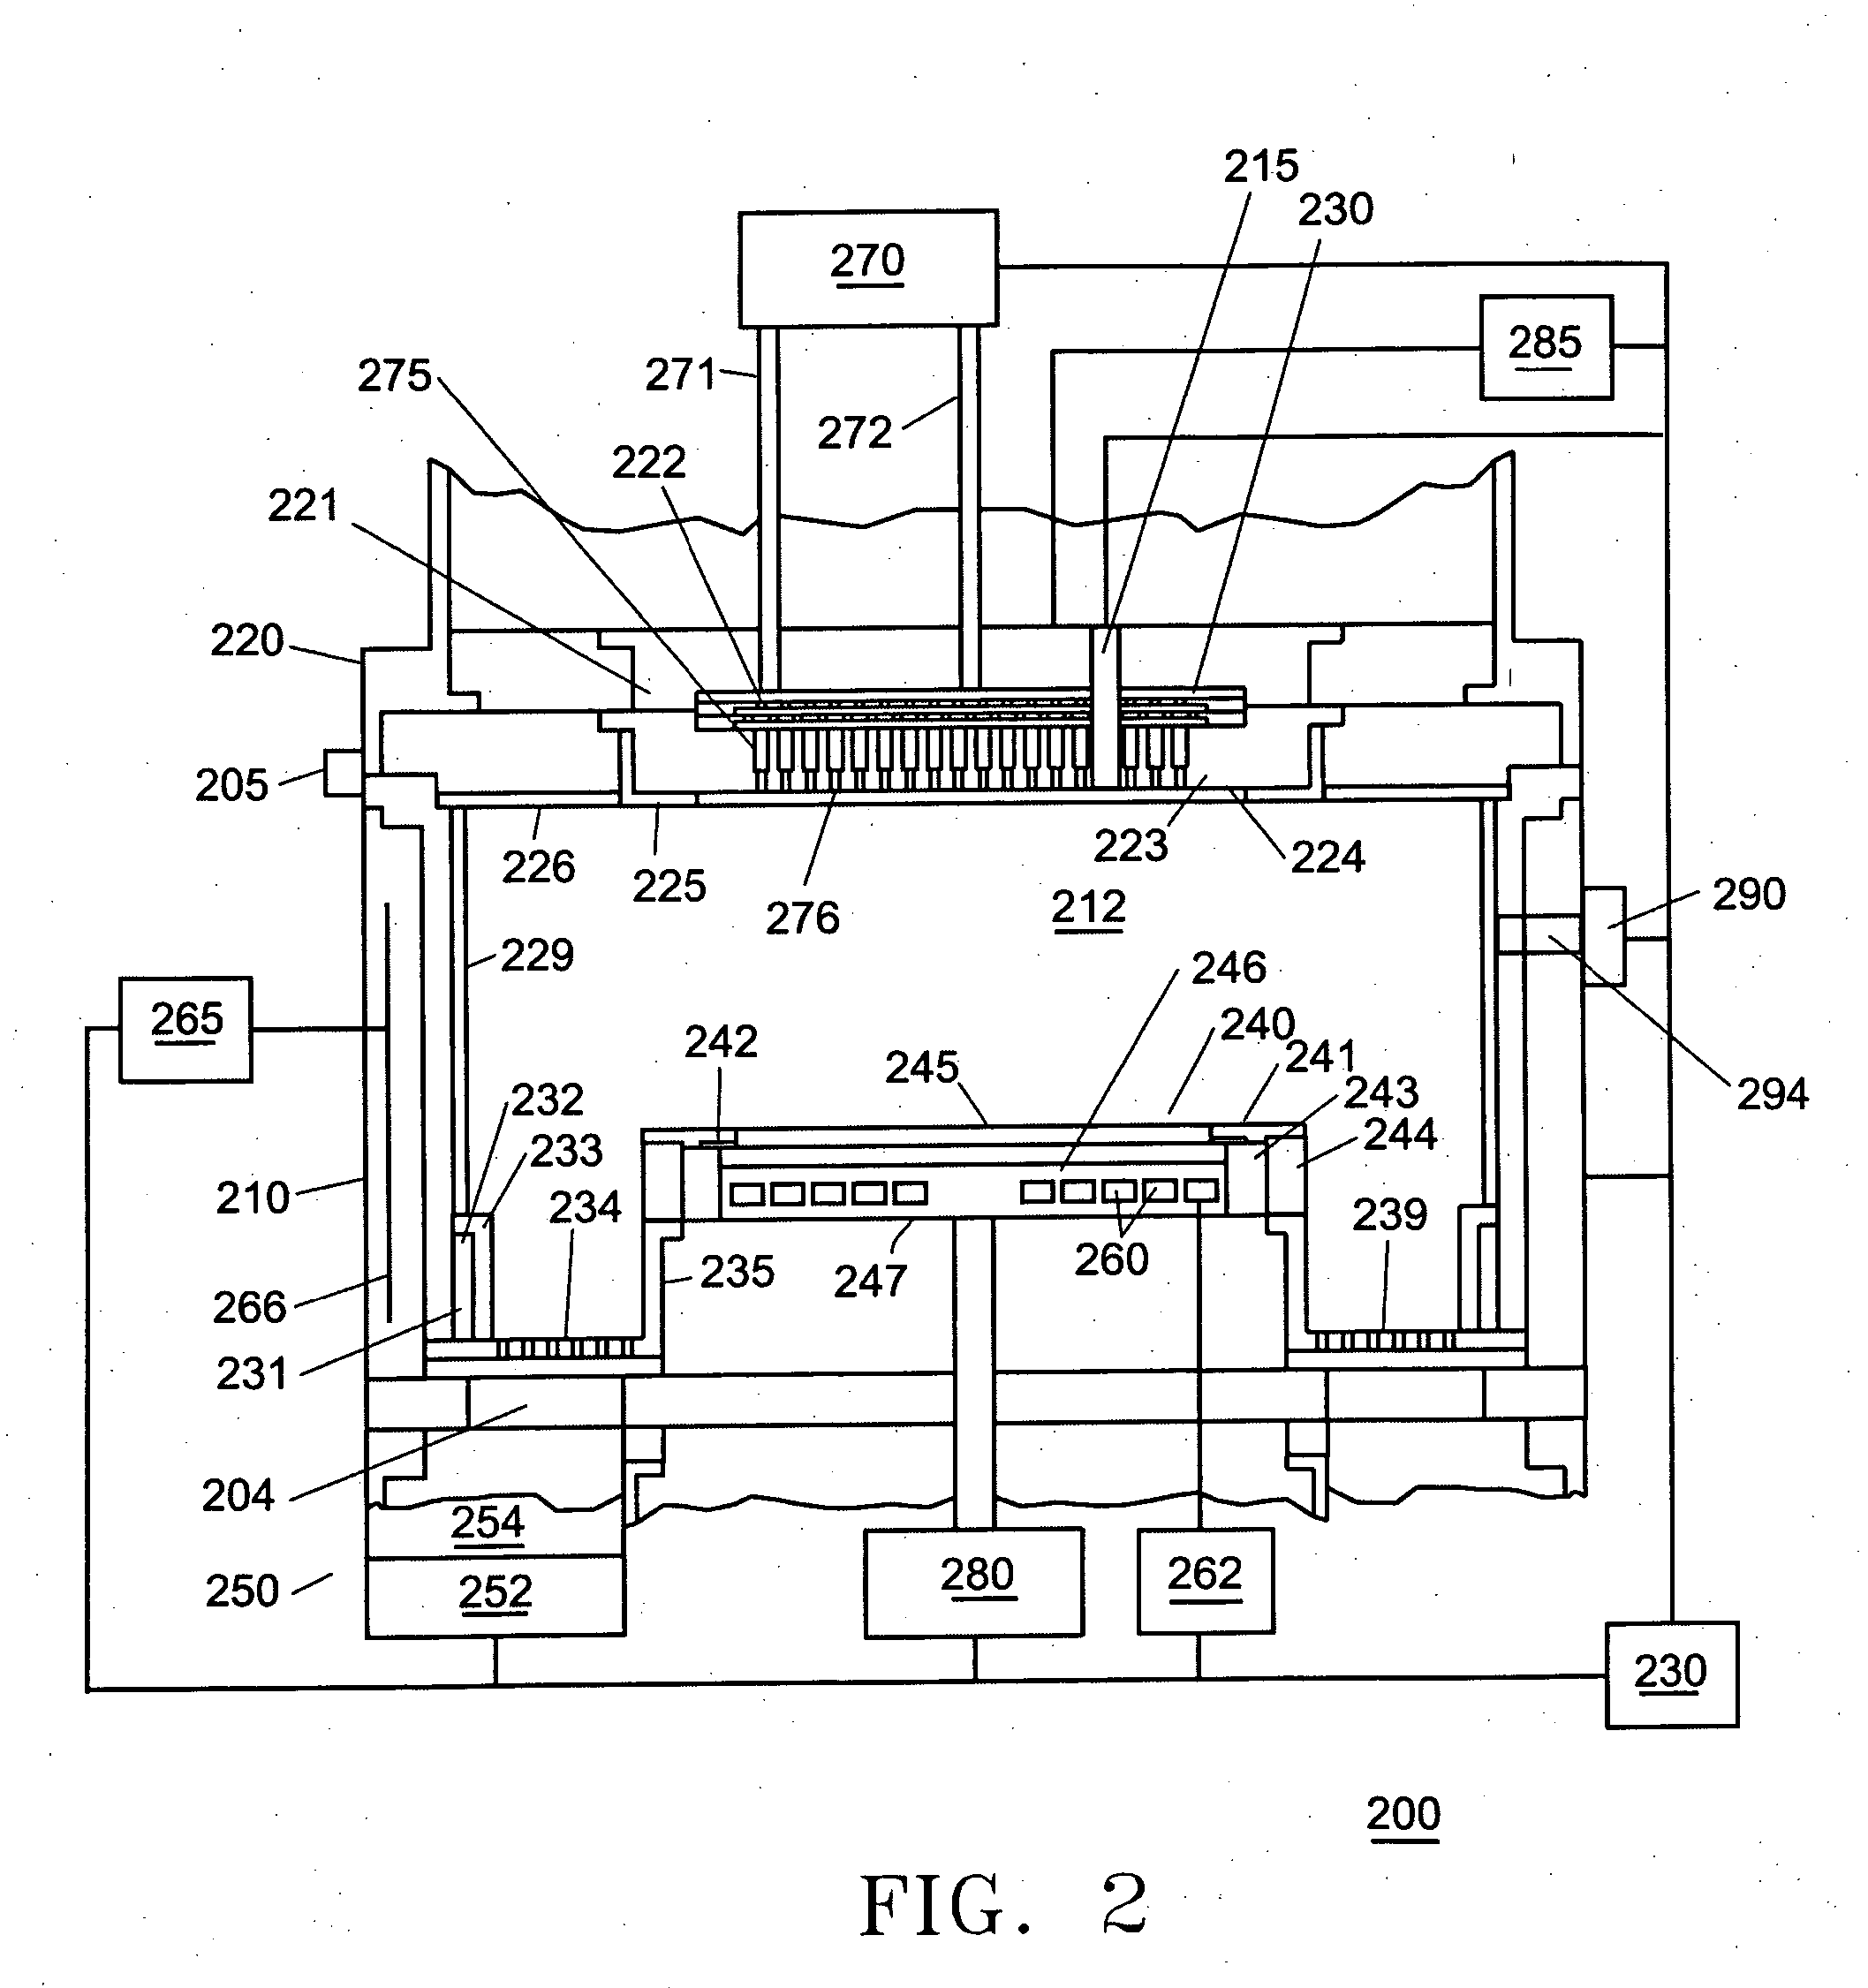 Method for conditioning a process chamber